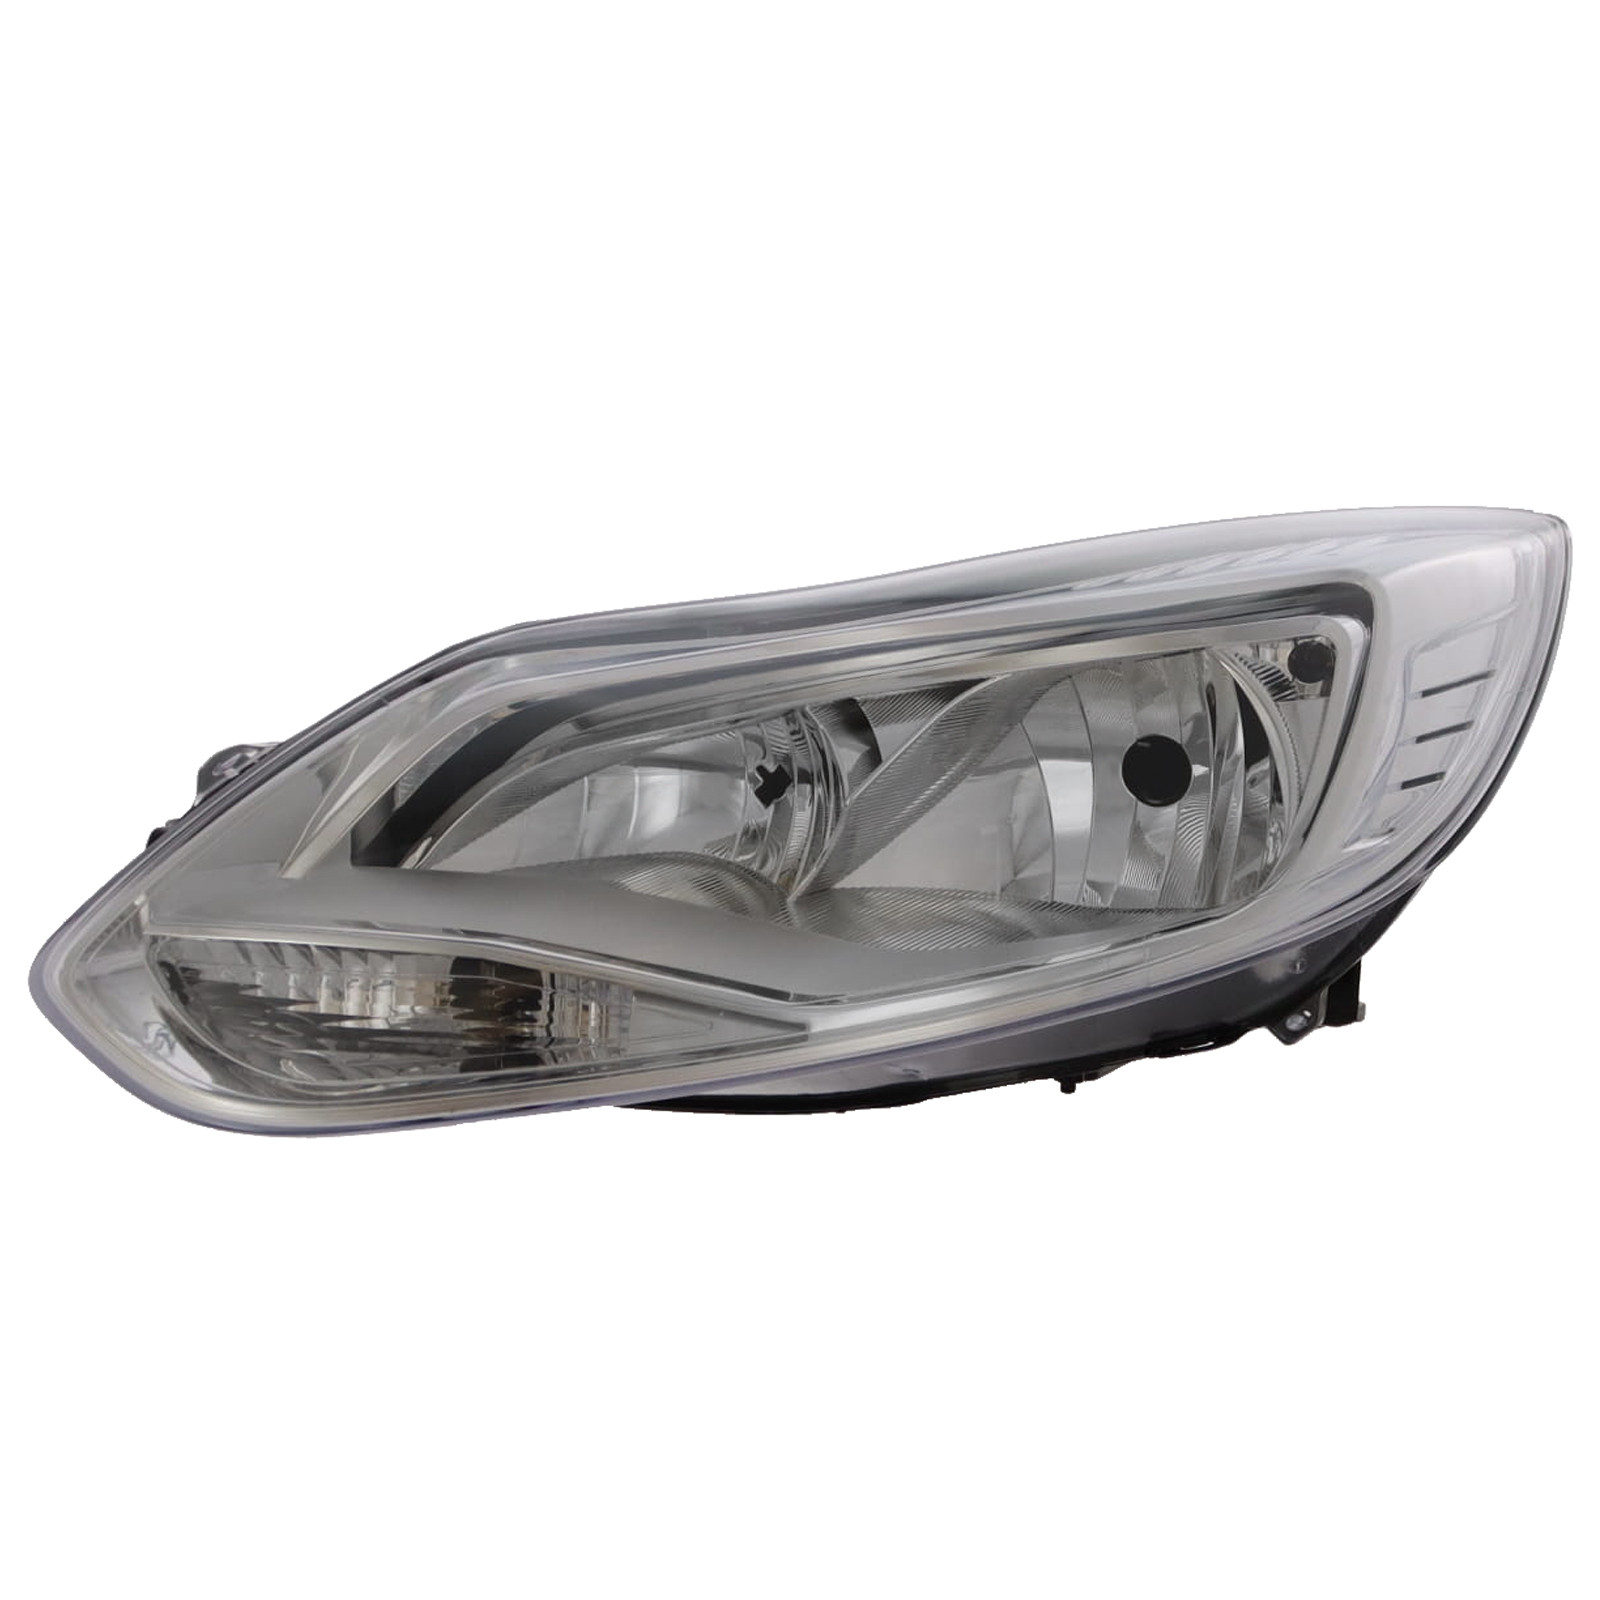 Ford Focus 2011-2014 Halogen, Electric With Motor, Headlight / Headlamp with Chrome Surround Passengers Side (LH)